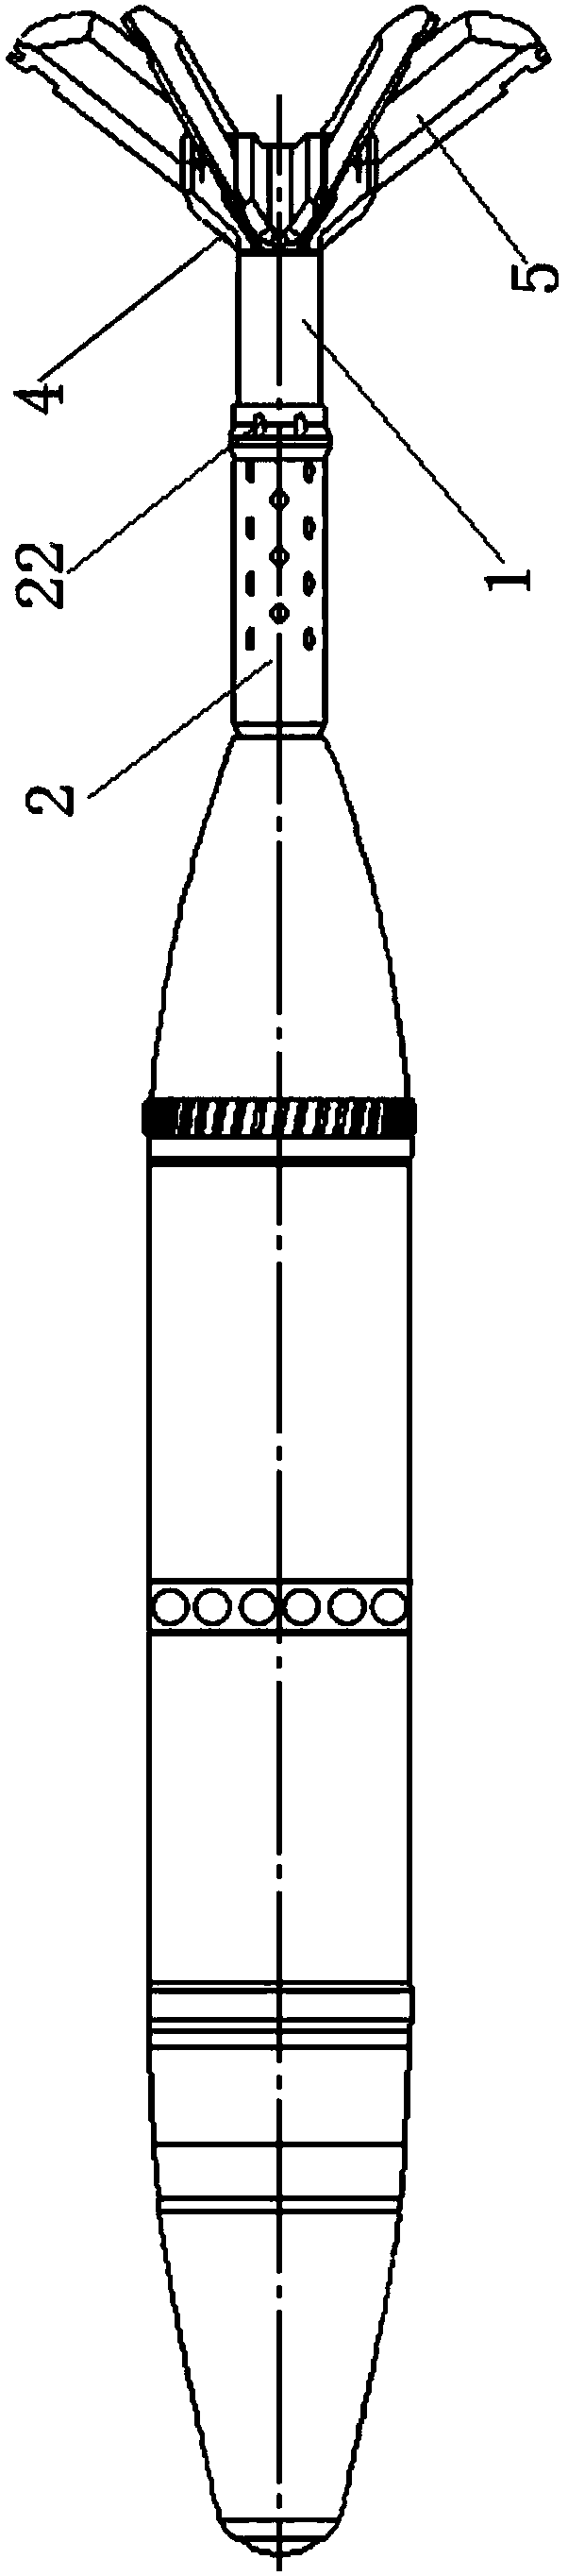 Variable pneumatic layout structure for projectile body